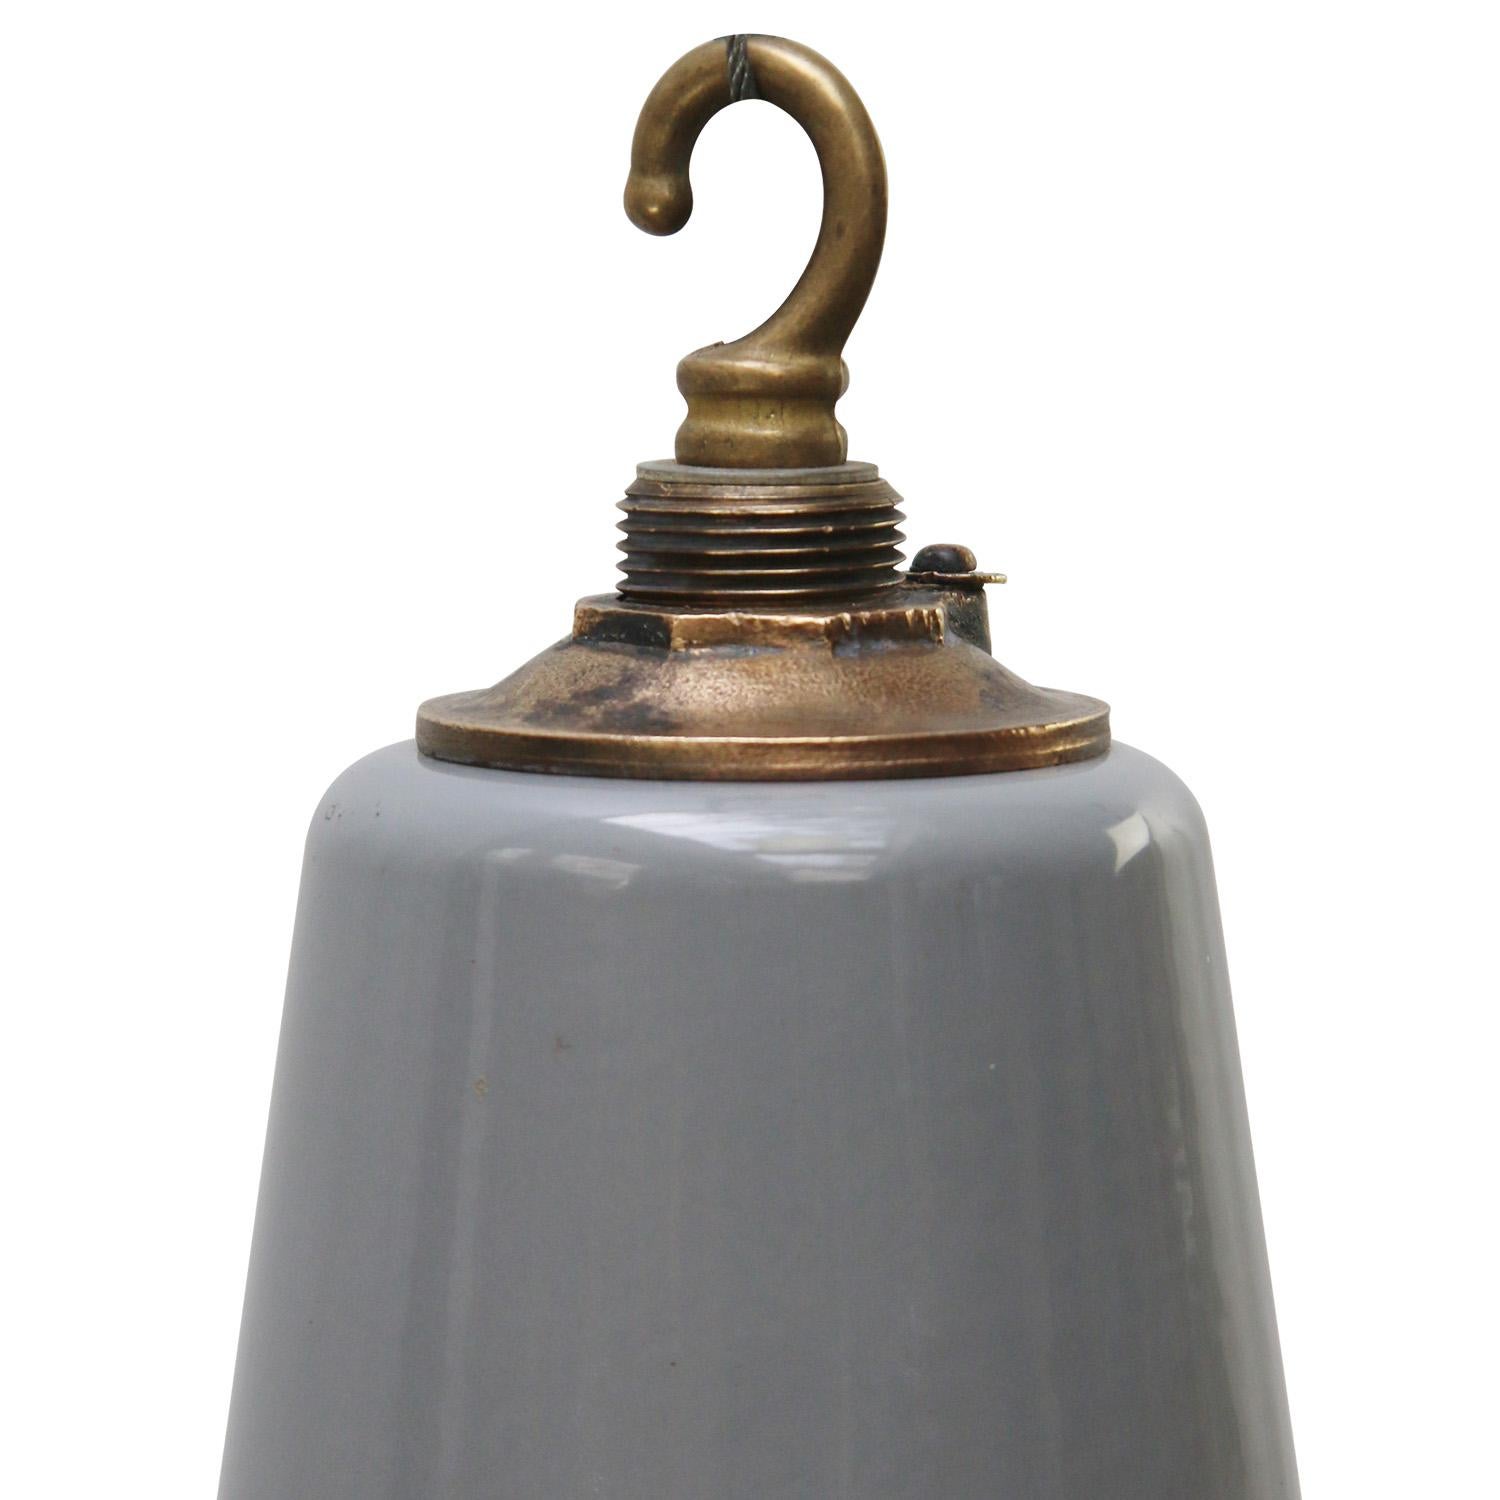 English vintage industrial classic
grey enamel white interior.

E27 / E26

Weight: 3.00 kg / 6.6 lb

Priced per individual item. All lamps have been made suitable by international standards for incandescent light bulbs, energy-efficient and